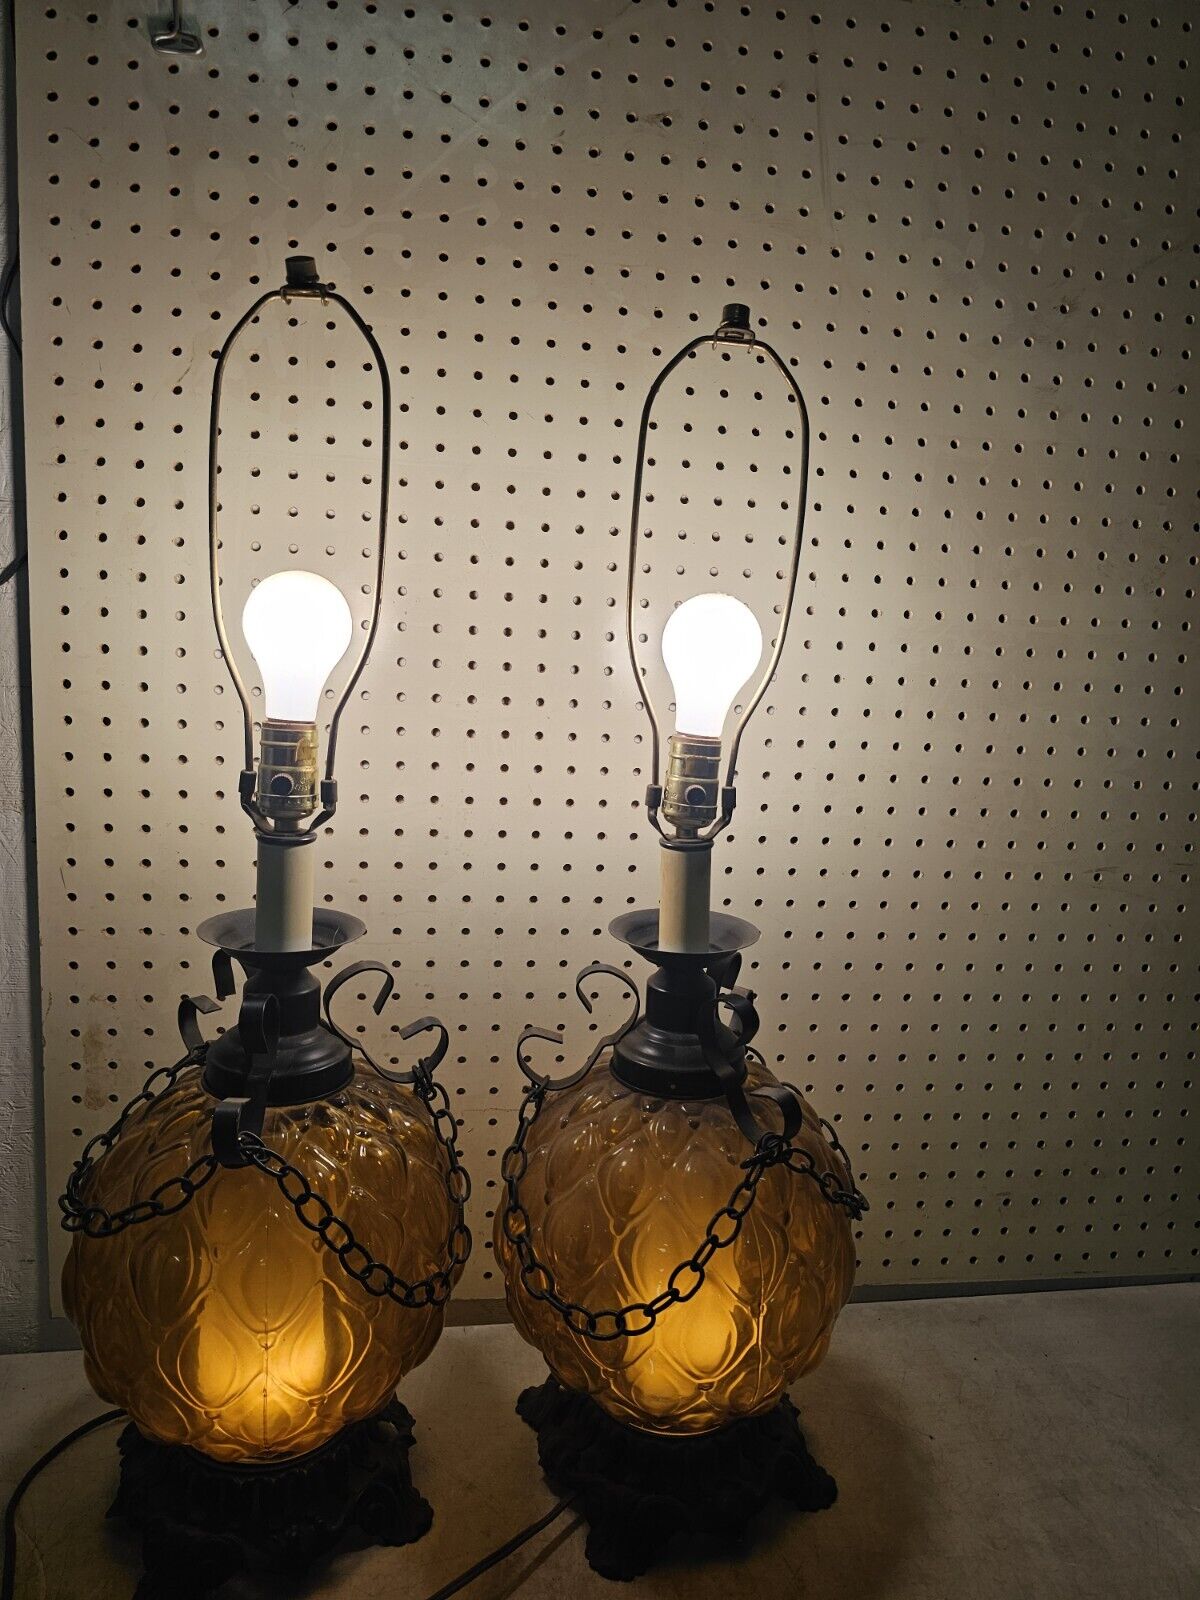 Pair of Vintage Retro Chain Decor Amber Lantern Table Desk Lamp Tested & Works